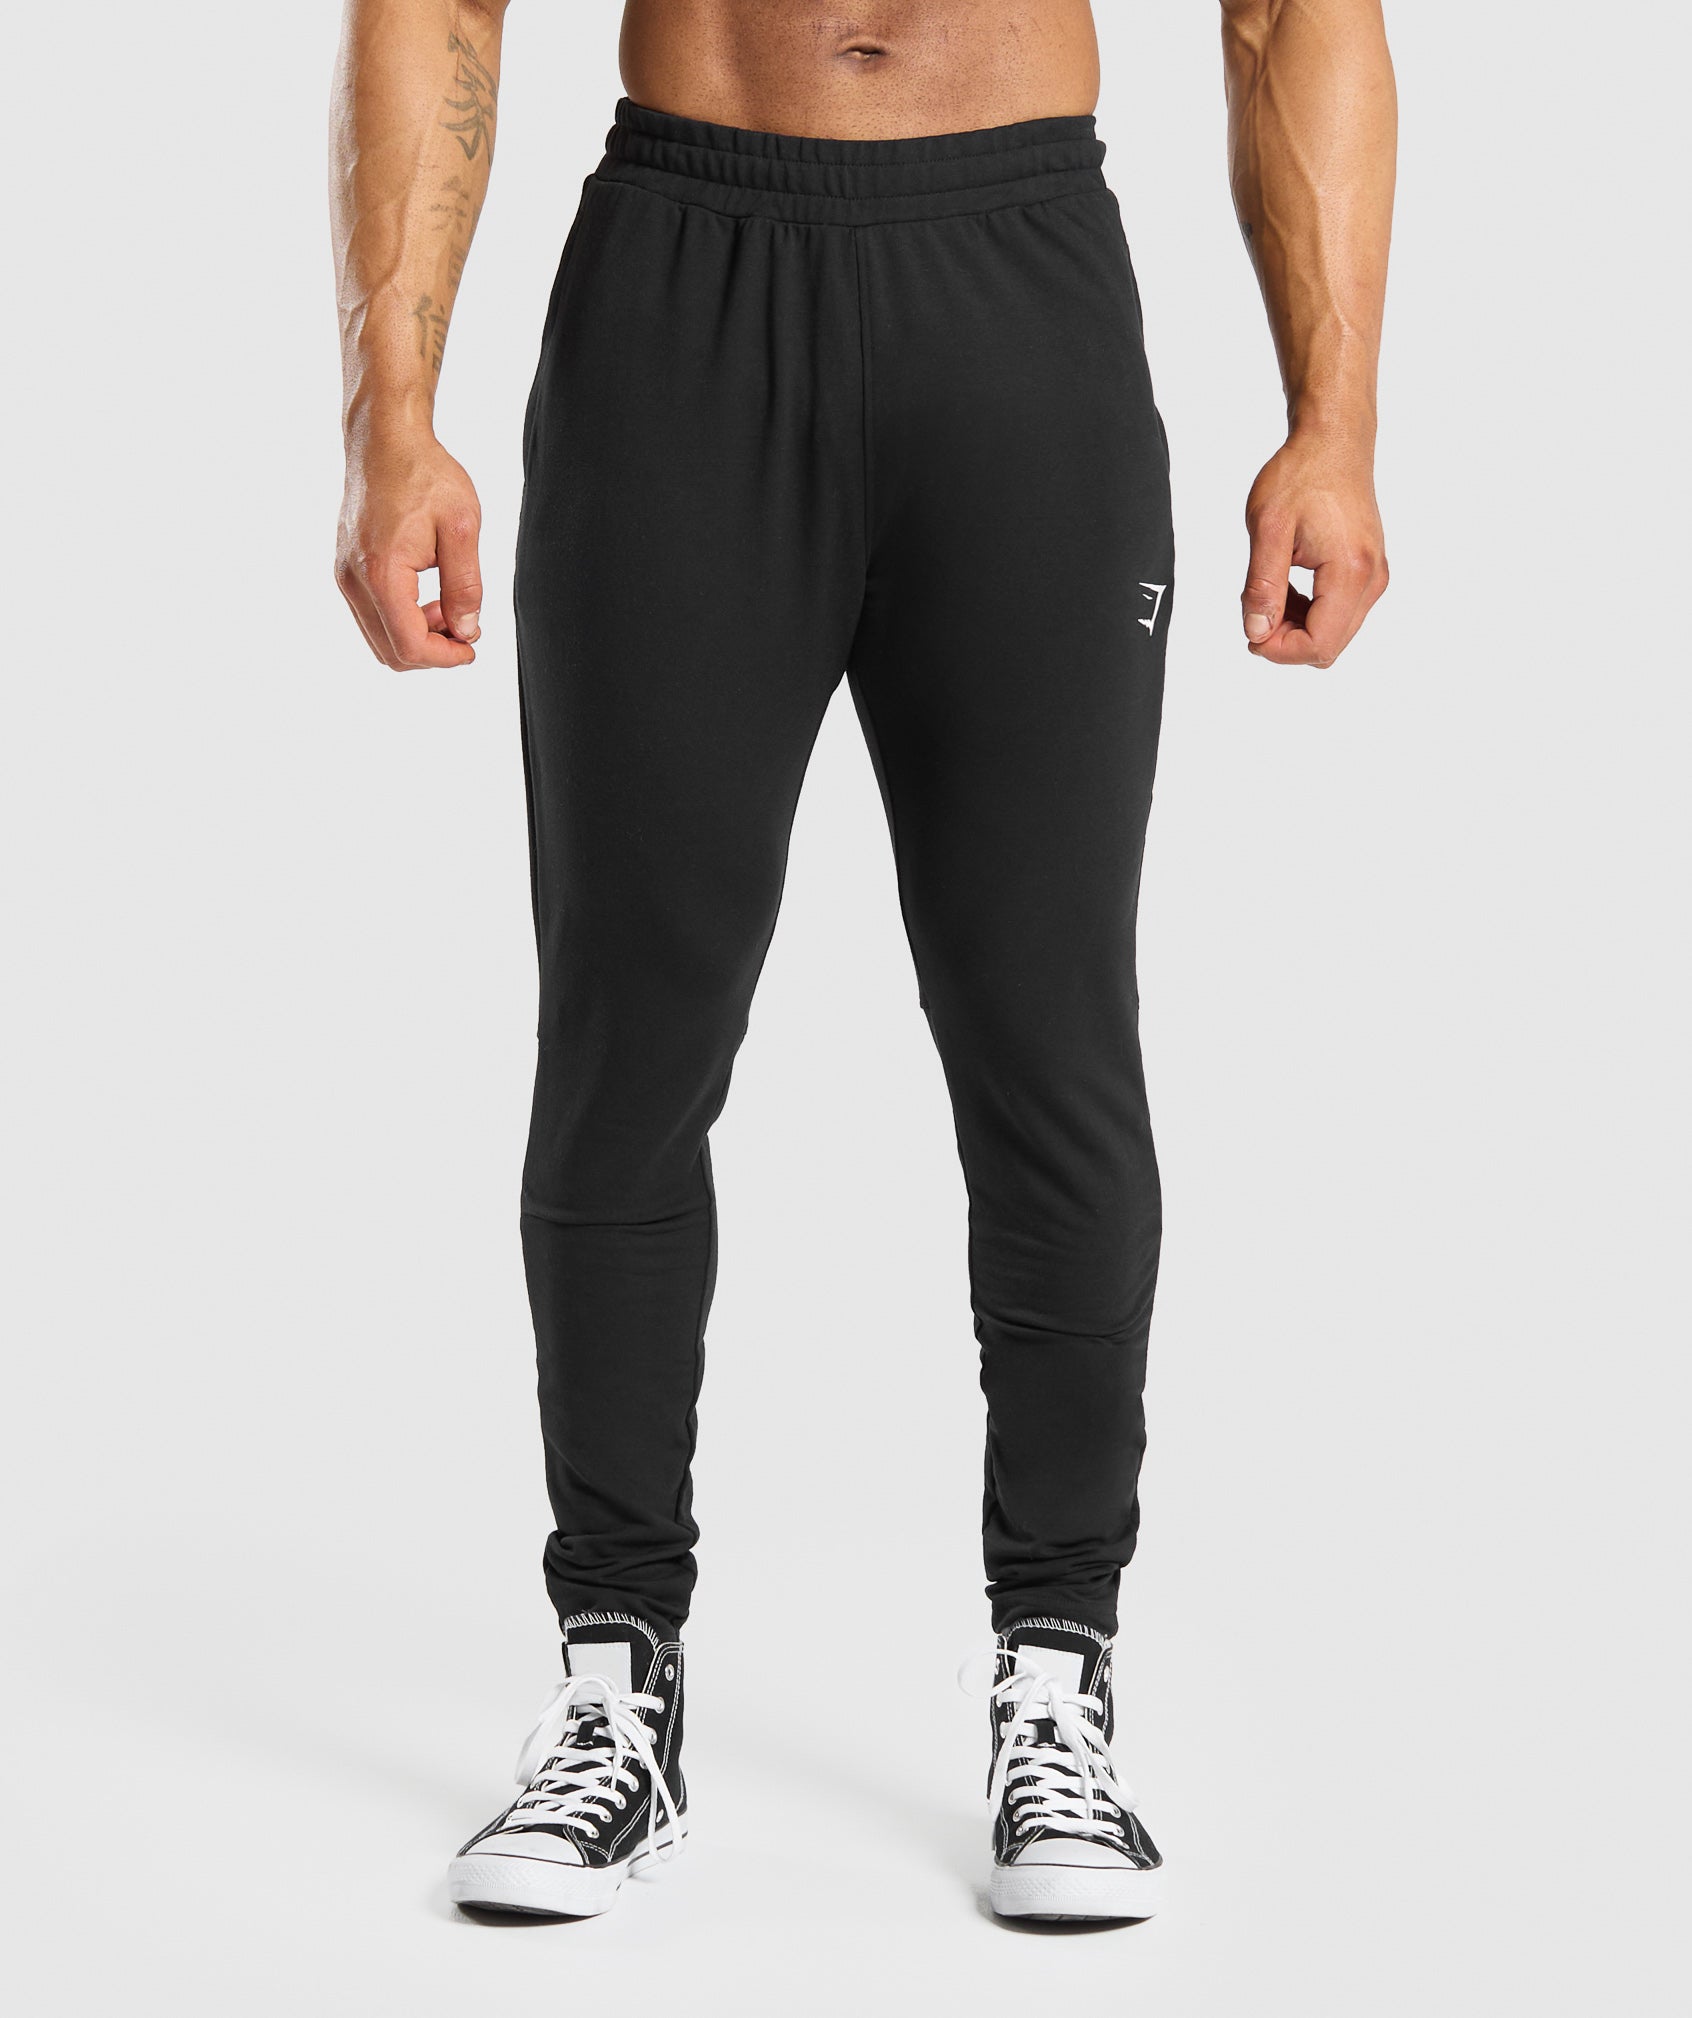 Essential Muscle Joggers in Black